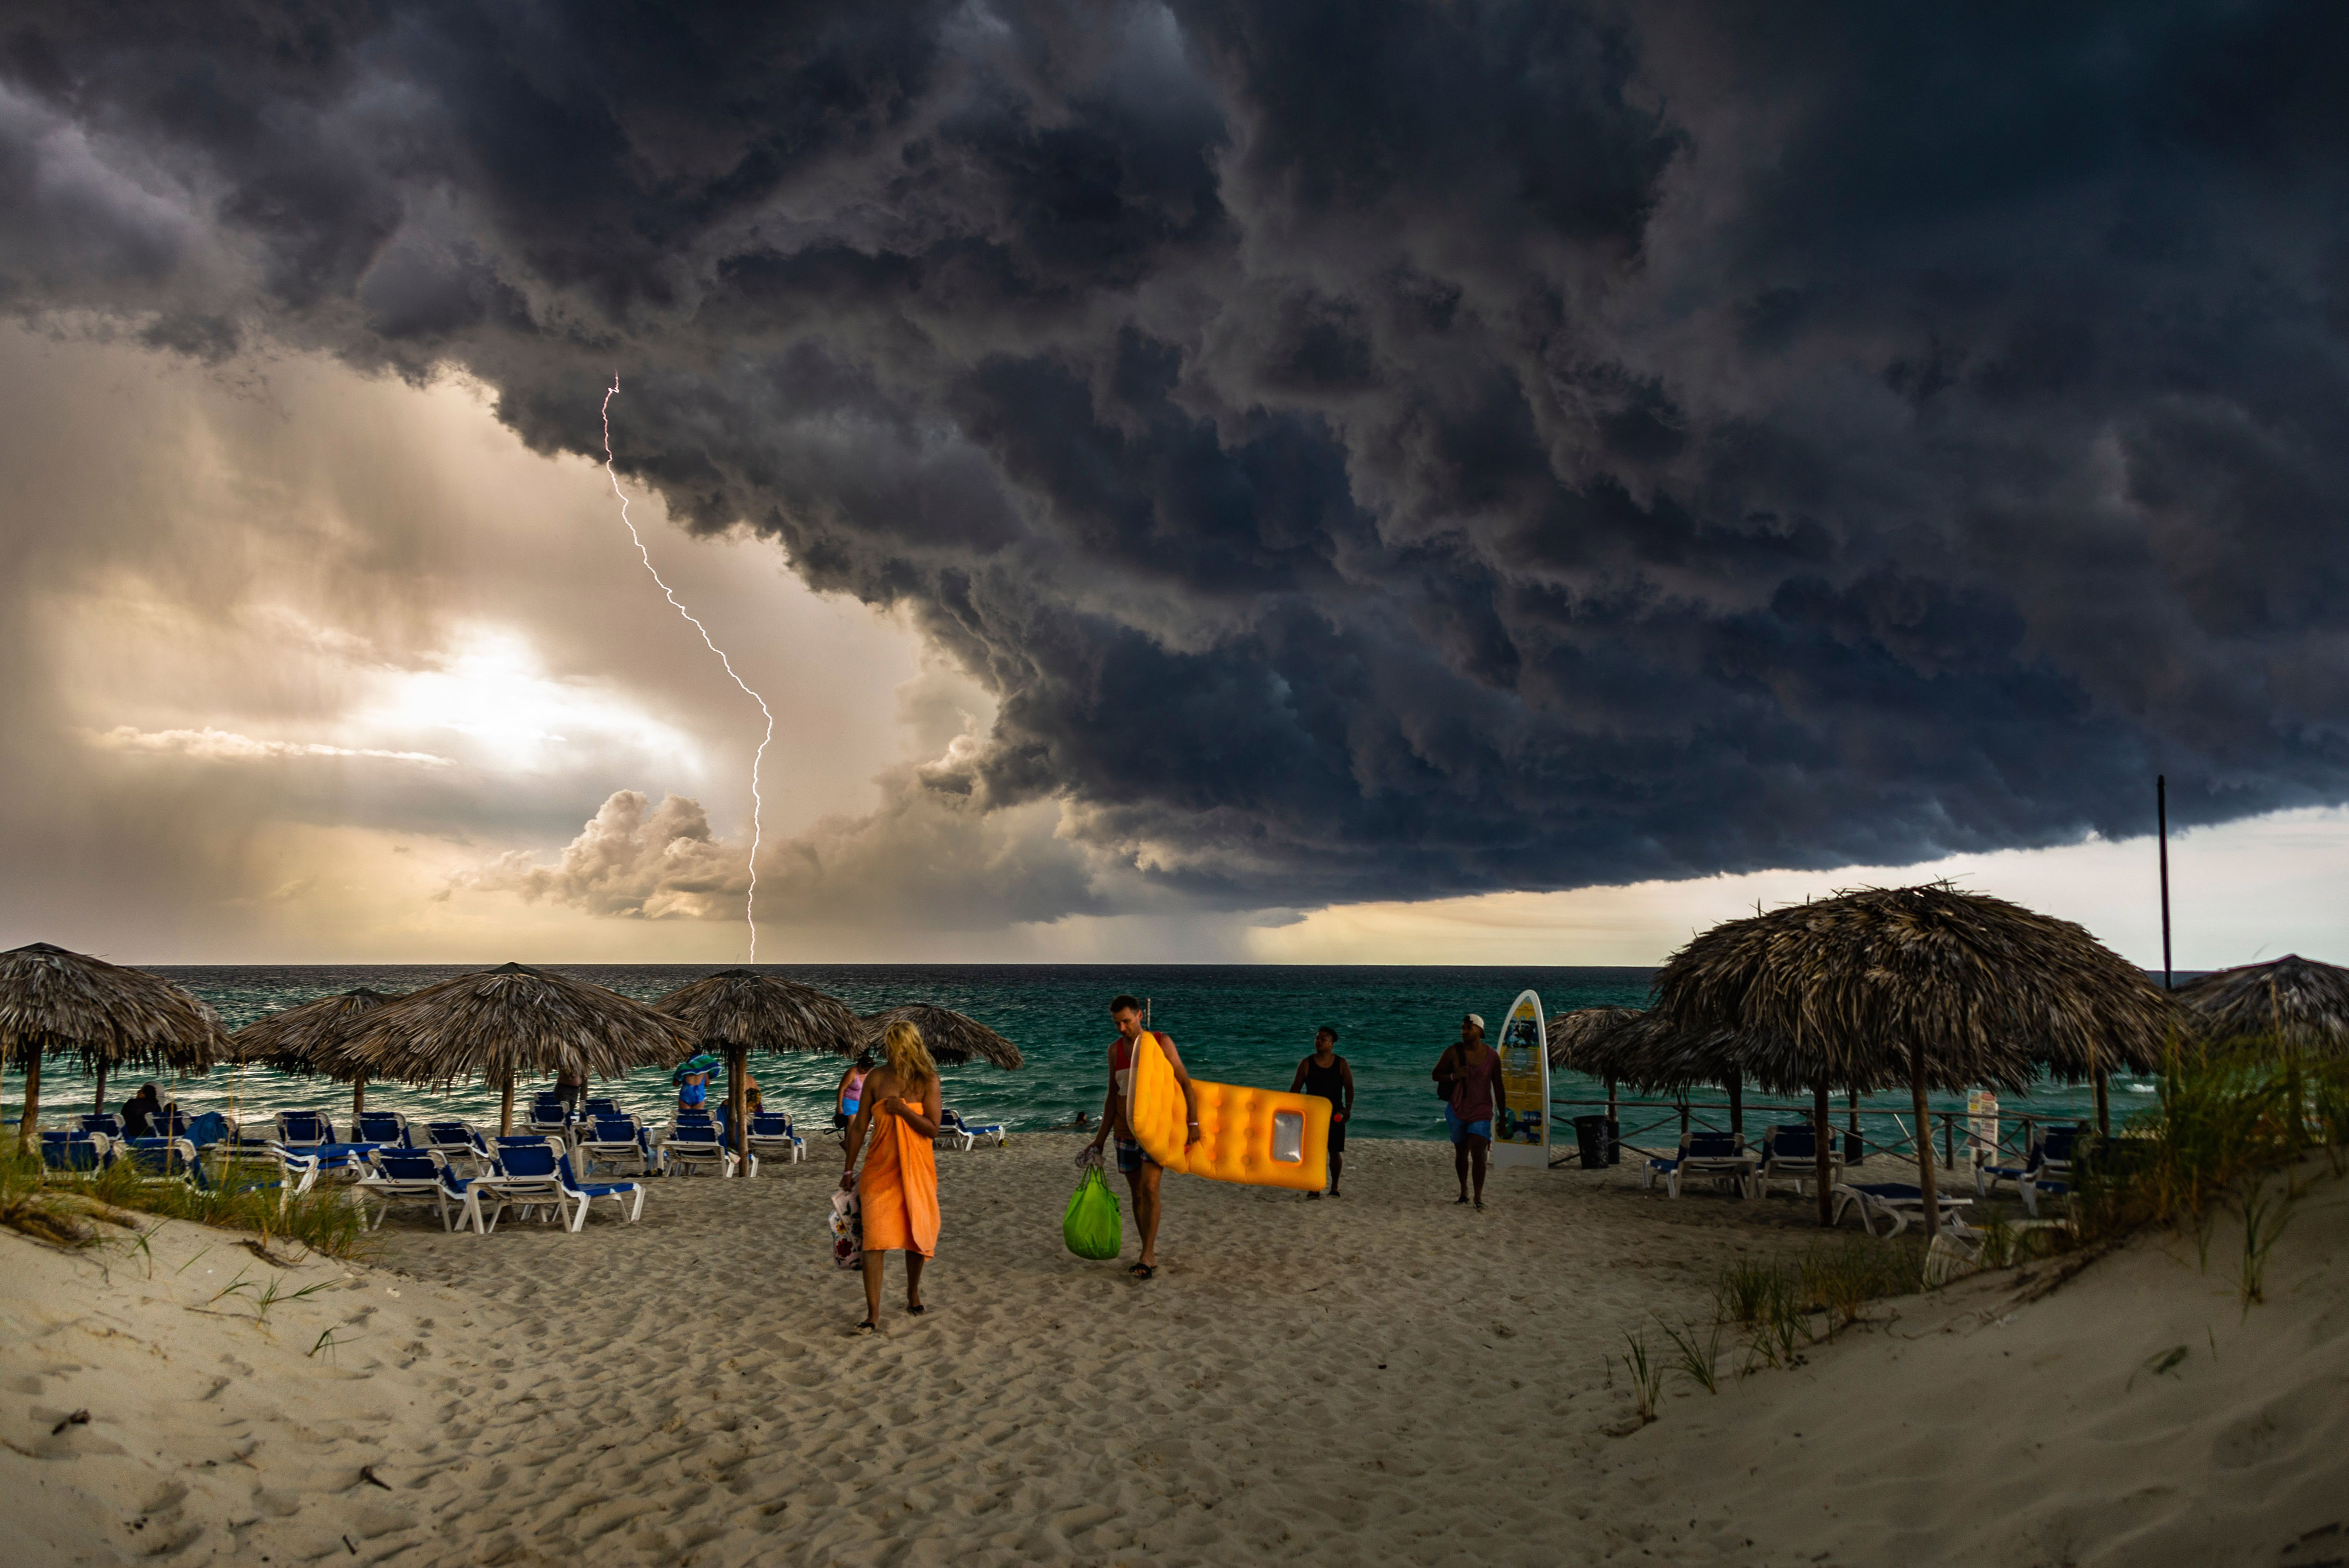 'The Storm is coming'. I was at Varadero beach, Cuba when I saw this huge cloud coming, then I ran to the room and brought my camera to capture it. With a lot of lightning I took some shots of this amazing storm. In the original photo I captured the exact moment when the lightning strikes the sea, without using long exposure features in daylight. That’s it! © Giovani Cordioli/TNC Photo Contest